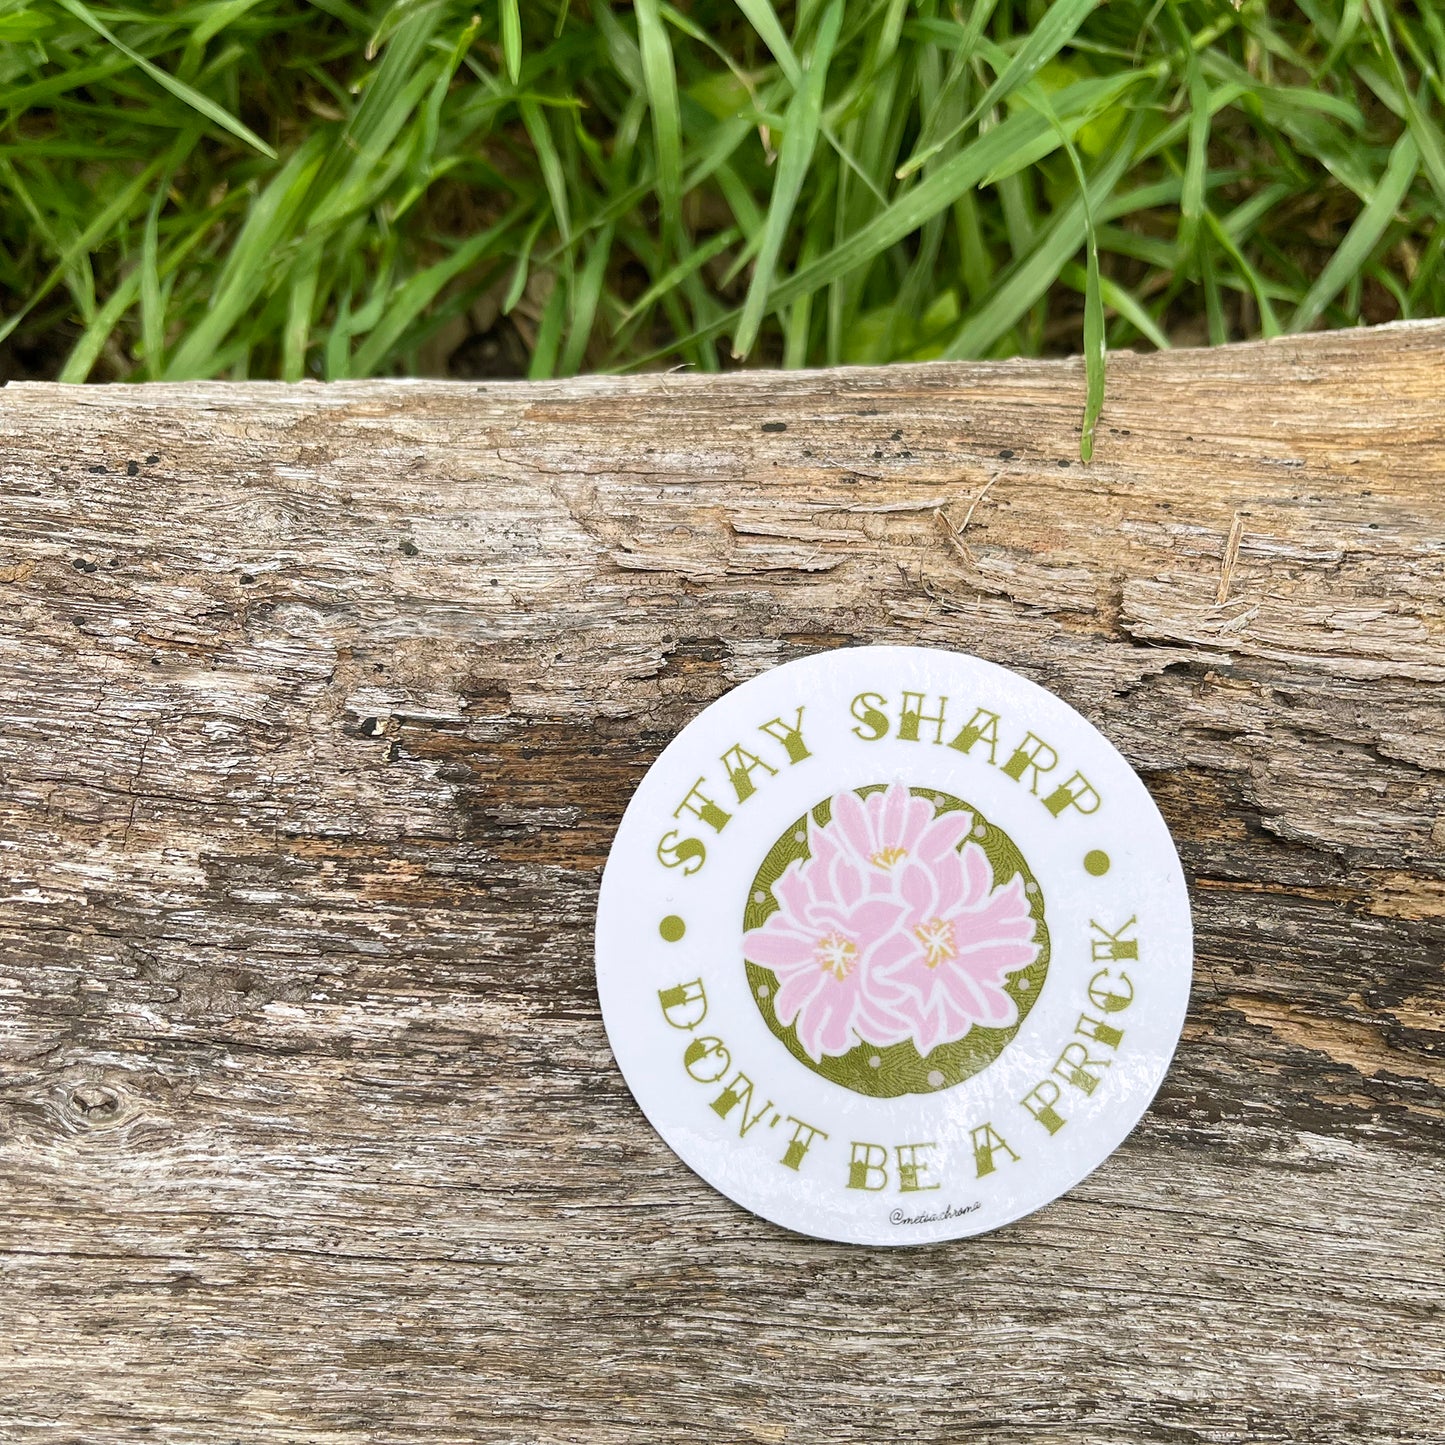 stay sharp don't be a prick round decal